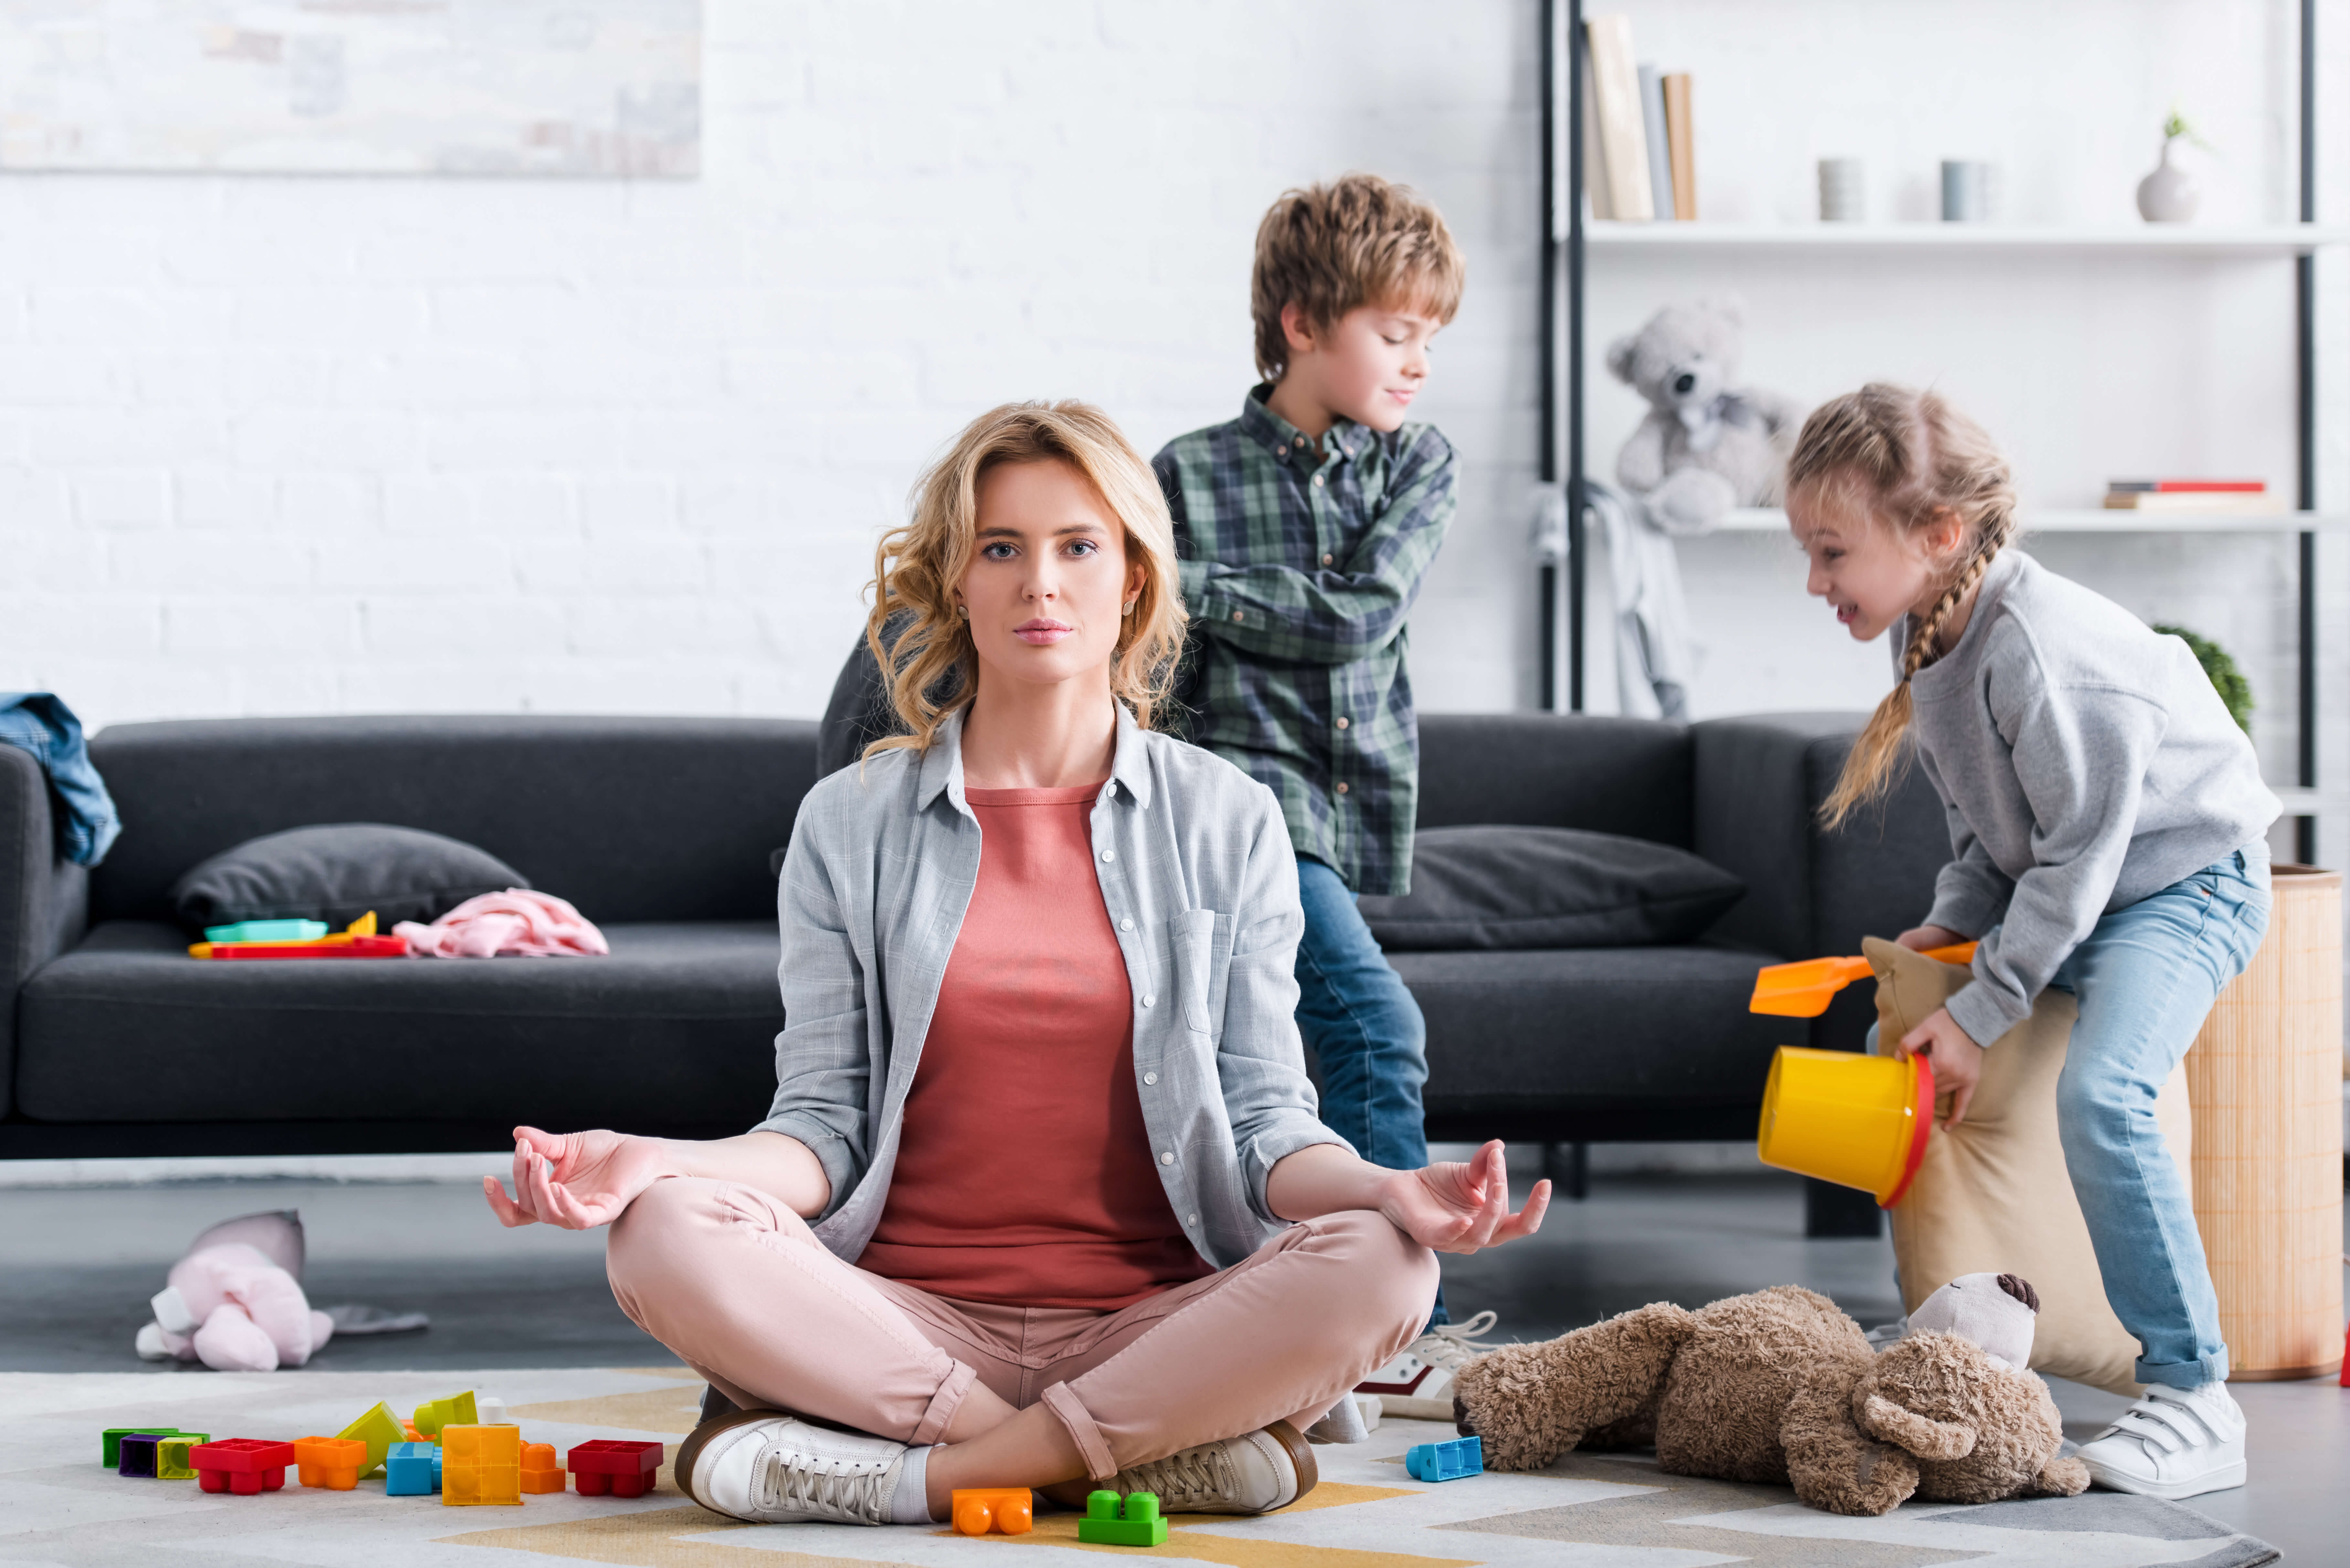 Ways to stay sane when your kids are stuck at home with school closures, rainy days and snow days. If they're home and you're worried on how to entertain kids, you need these ideas. #coronavirus #distancelearning #staysane #entertainkids #stuckathome #stuckinside #stuckindoors